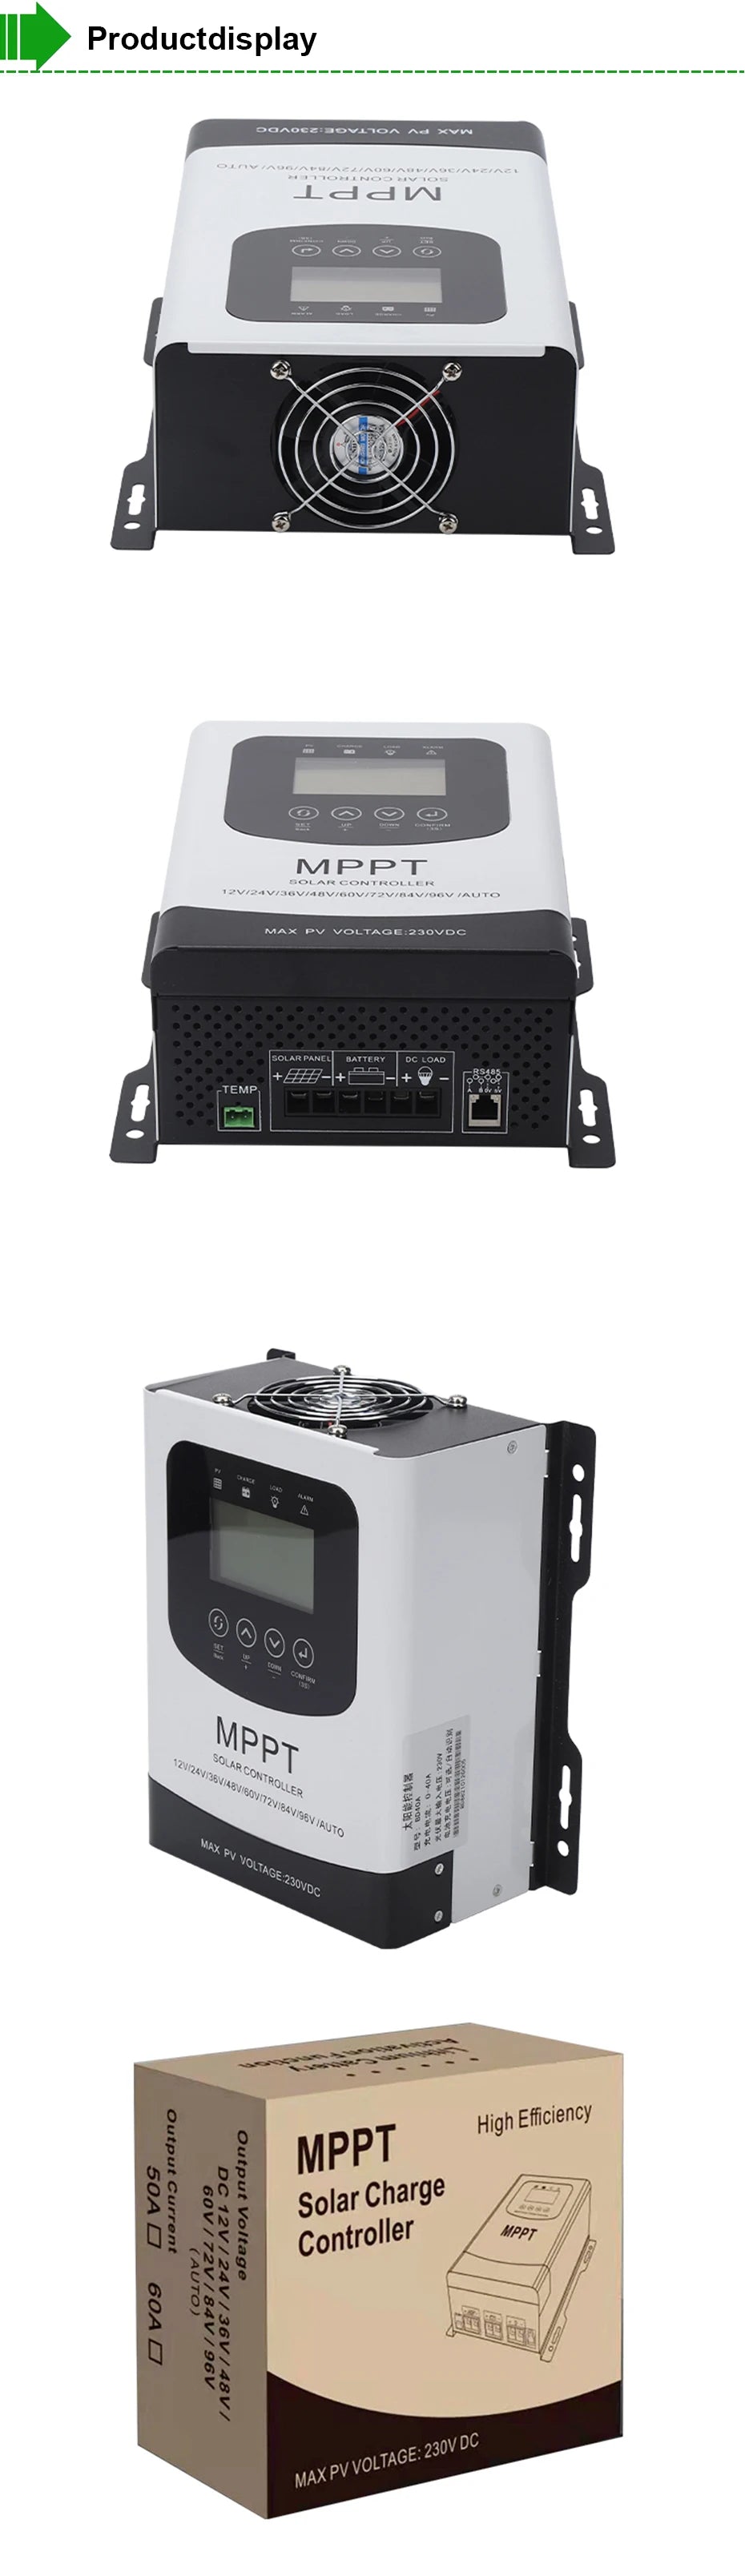 Laamu MPPT Solar Charge Controller: High-efficiency charger for Lifepo4 lithium batteries with multiple voltage inputs.